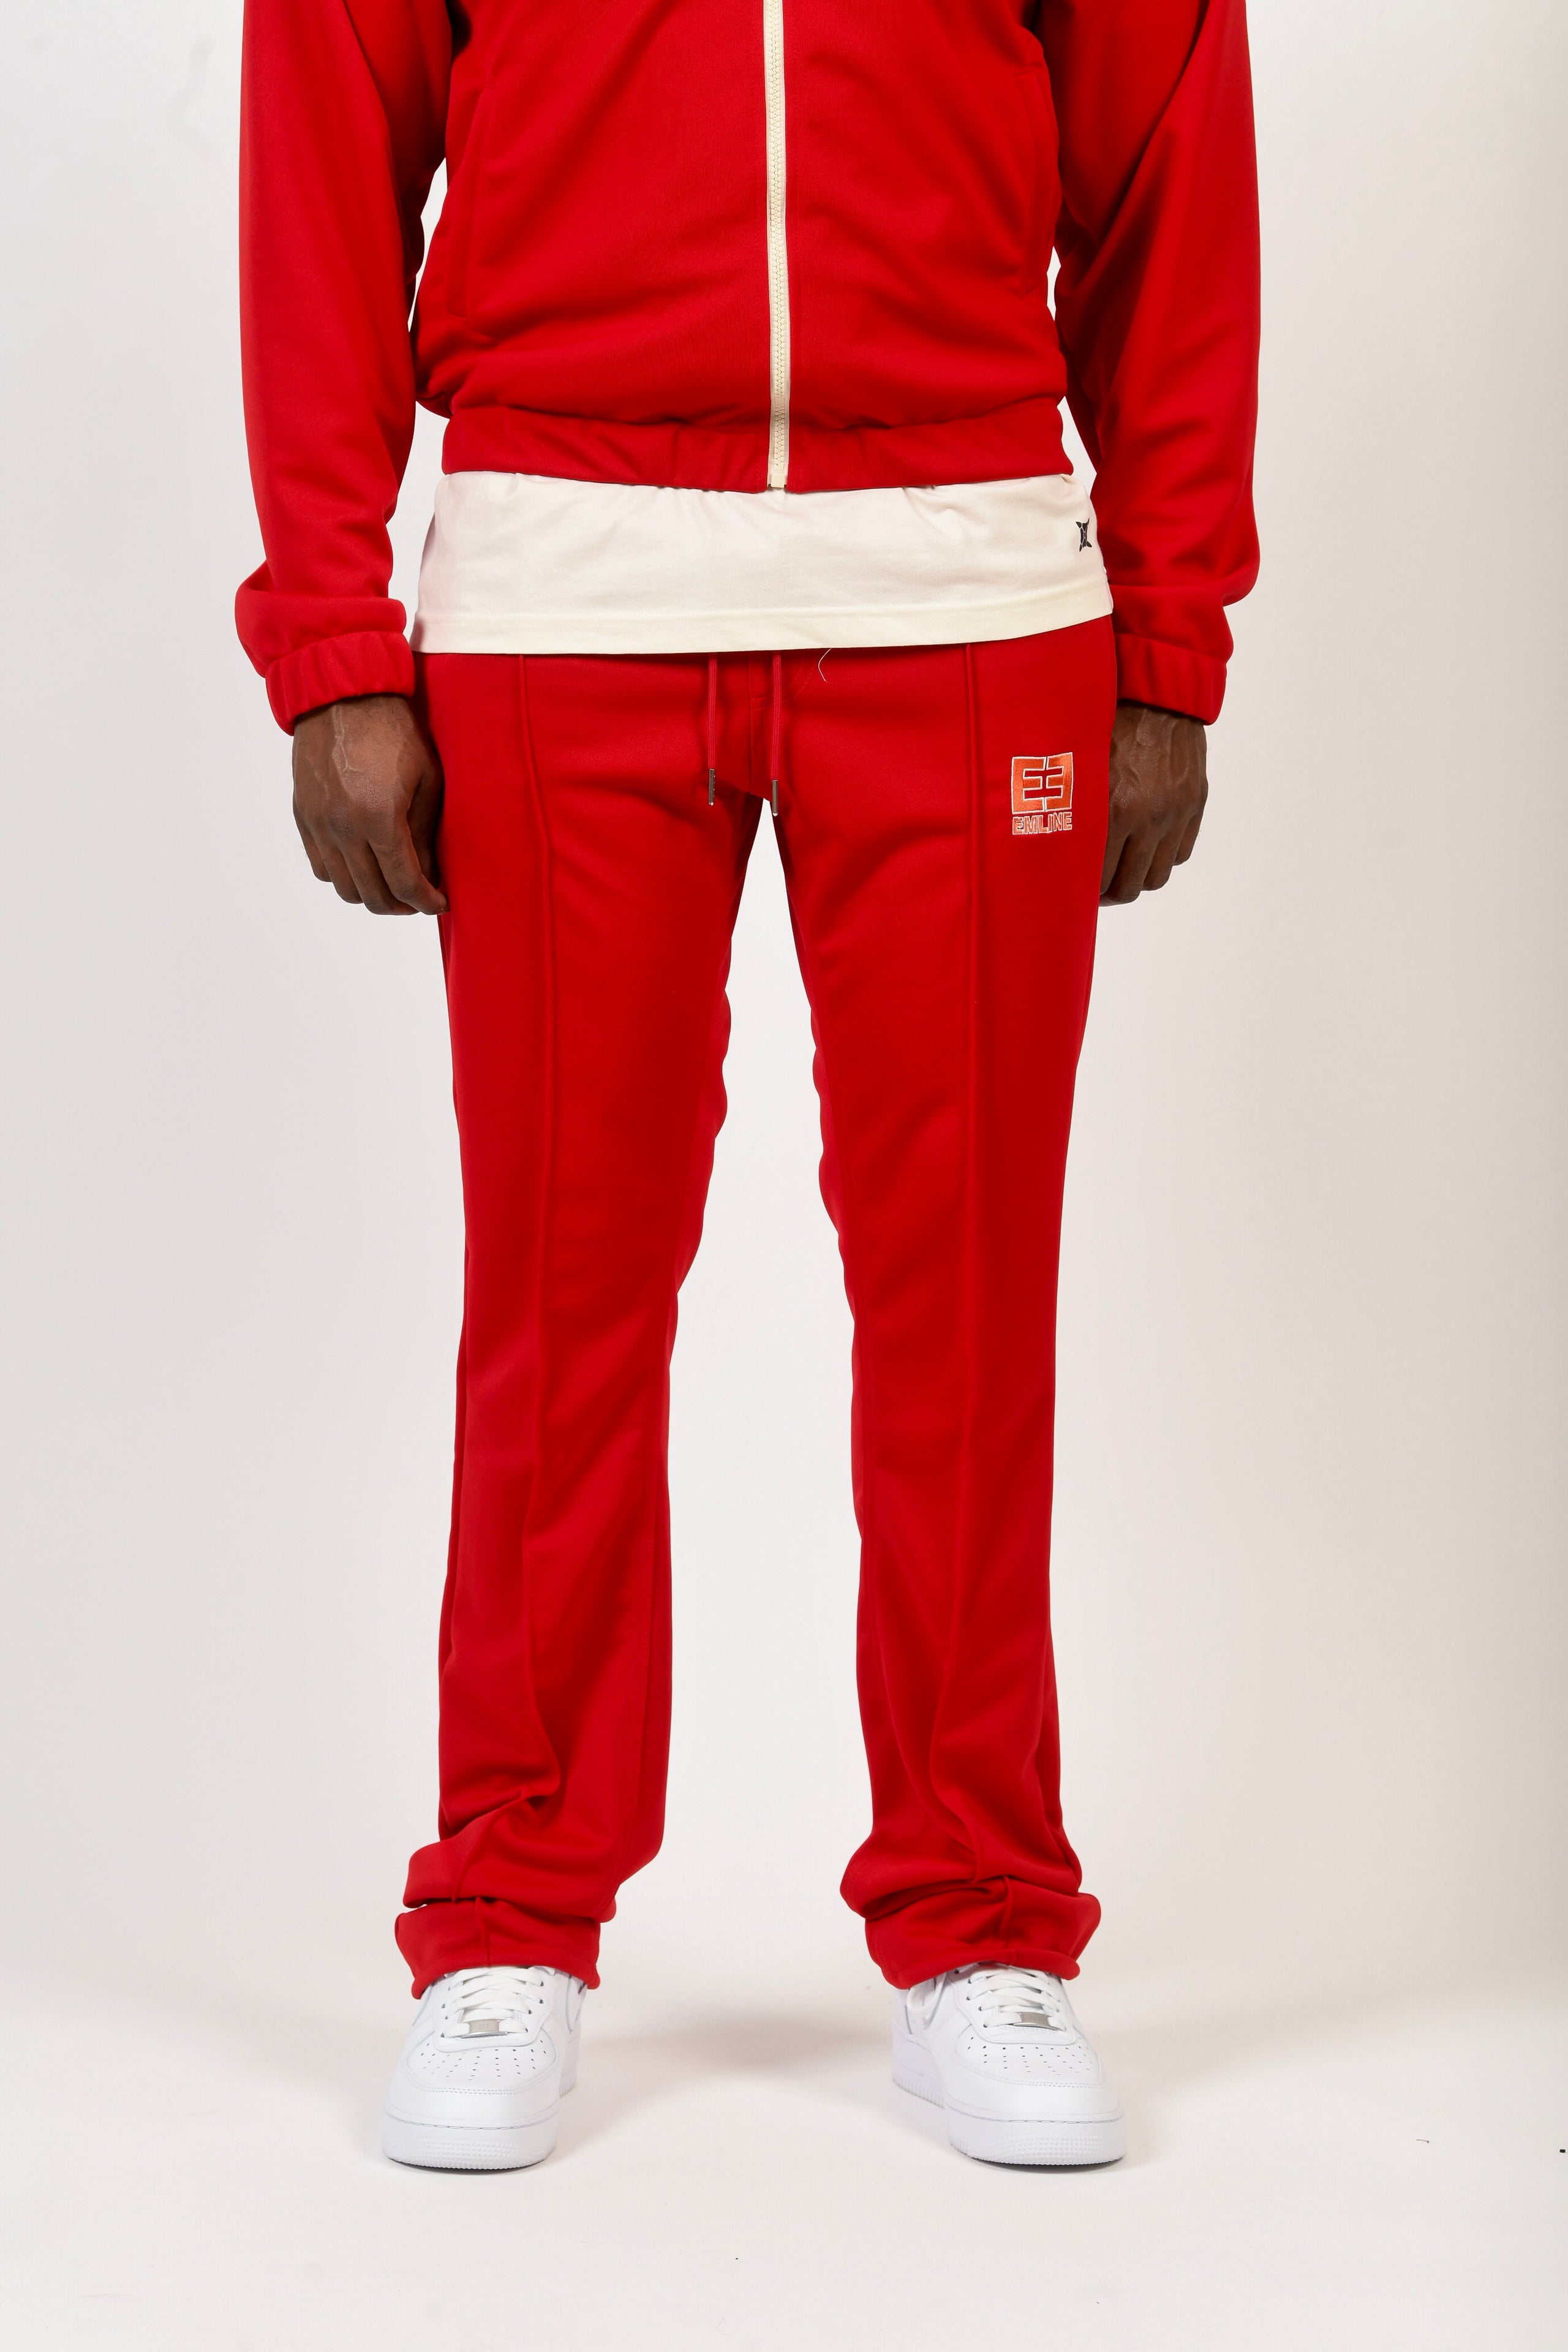 Track Pants- Red